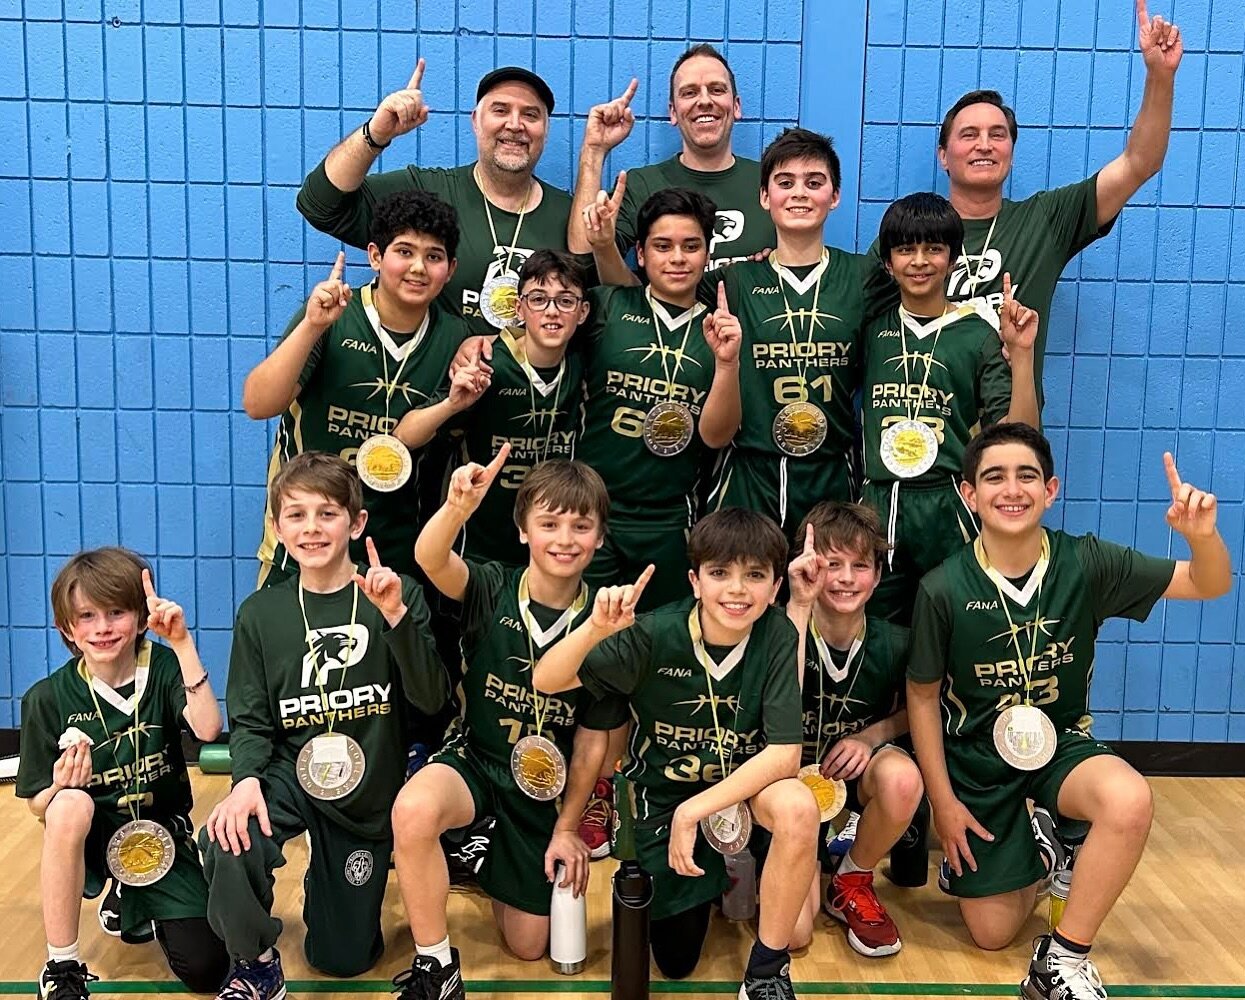 We are the Elementary Basketball League Champions!

In an electrifying boys&rsquo; championship game that will be etched in Priory history, the Priory Panthers clawed their way to victory against Coll&egrave;ge Sainte-Anne, a school known for its Spo